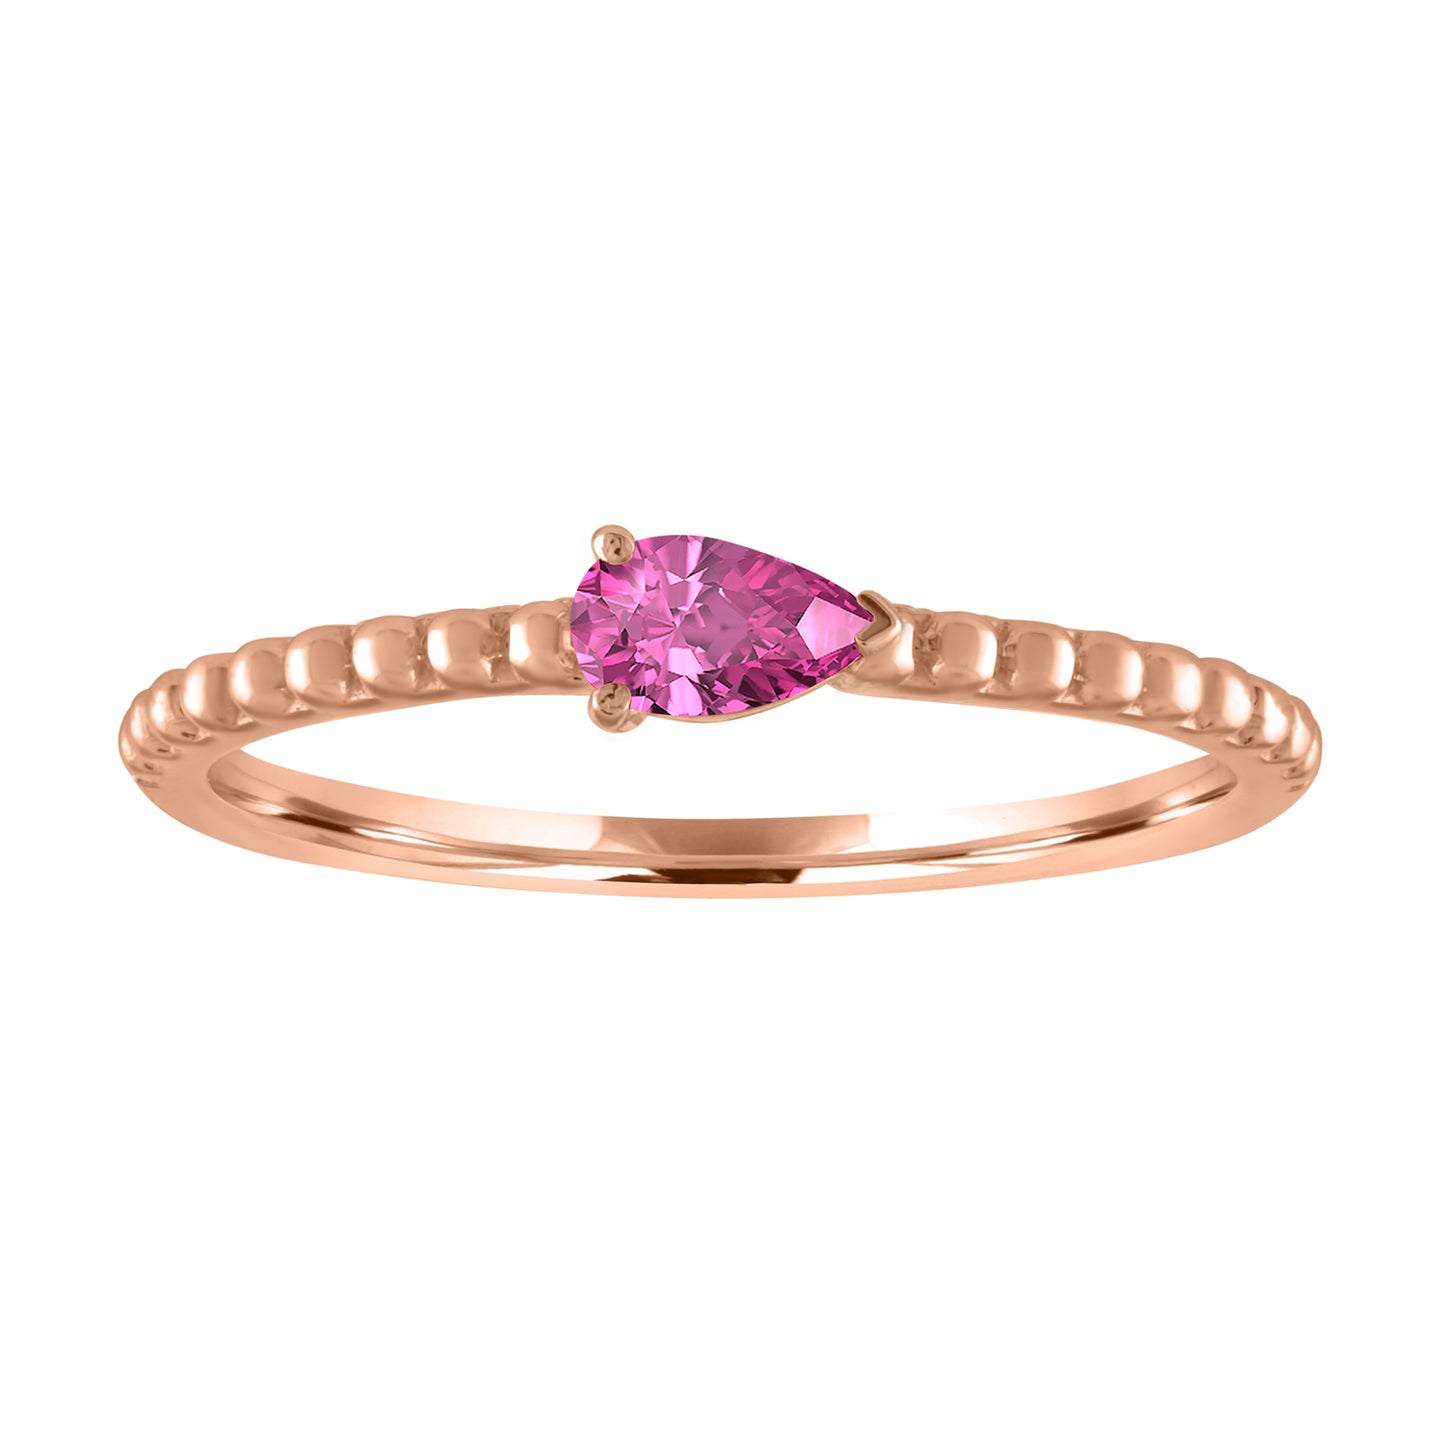 Rose gold beaded skinny band with a pear shaped pink tourmaline in the center. 